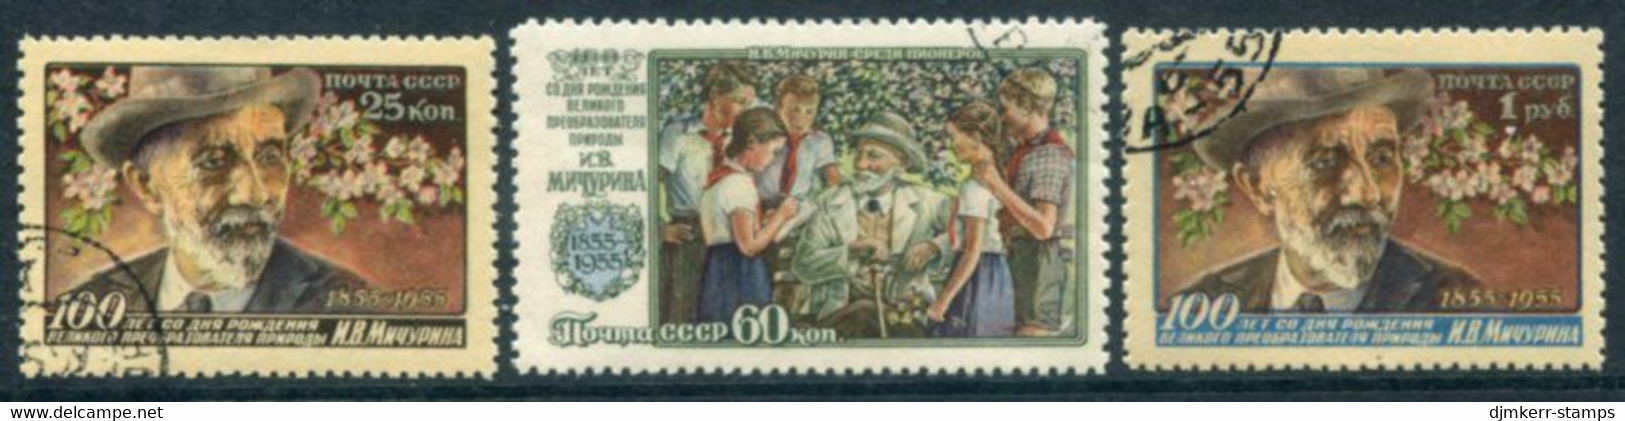 SOVIET UNION 1956 Michurin Birth Centenary Used  Michel 1836-38 - Used Stamps